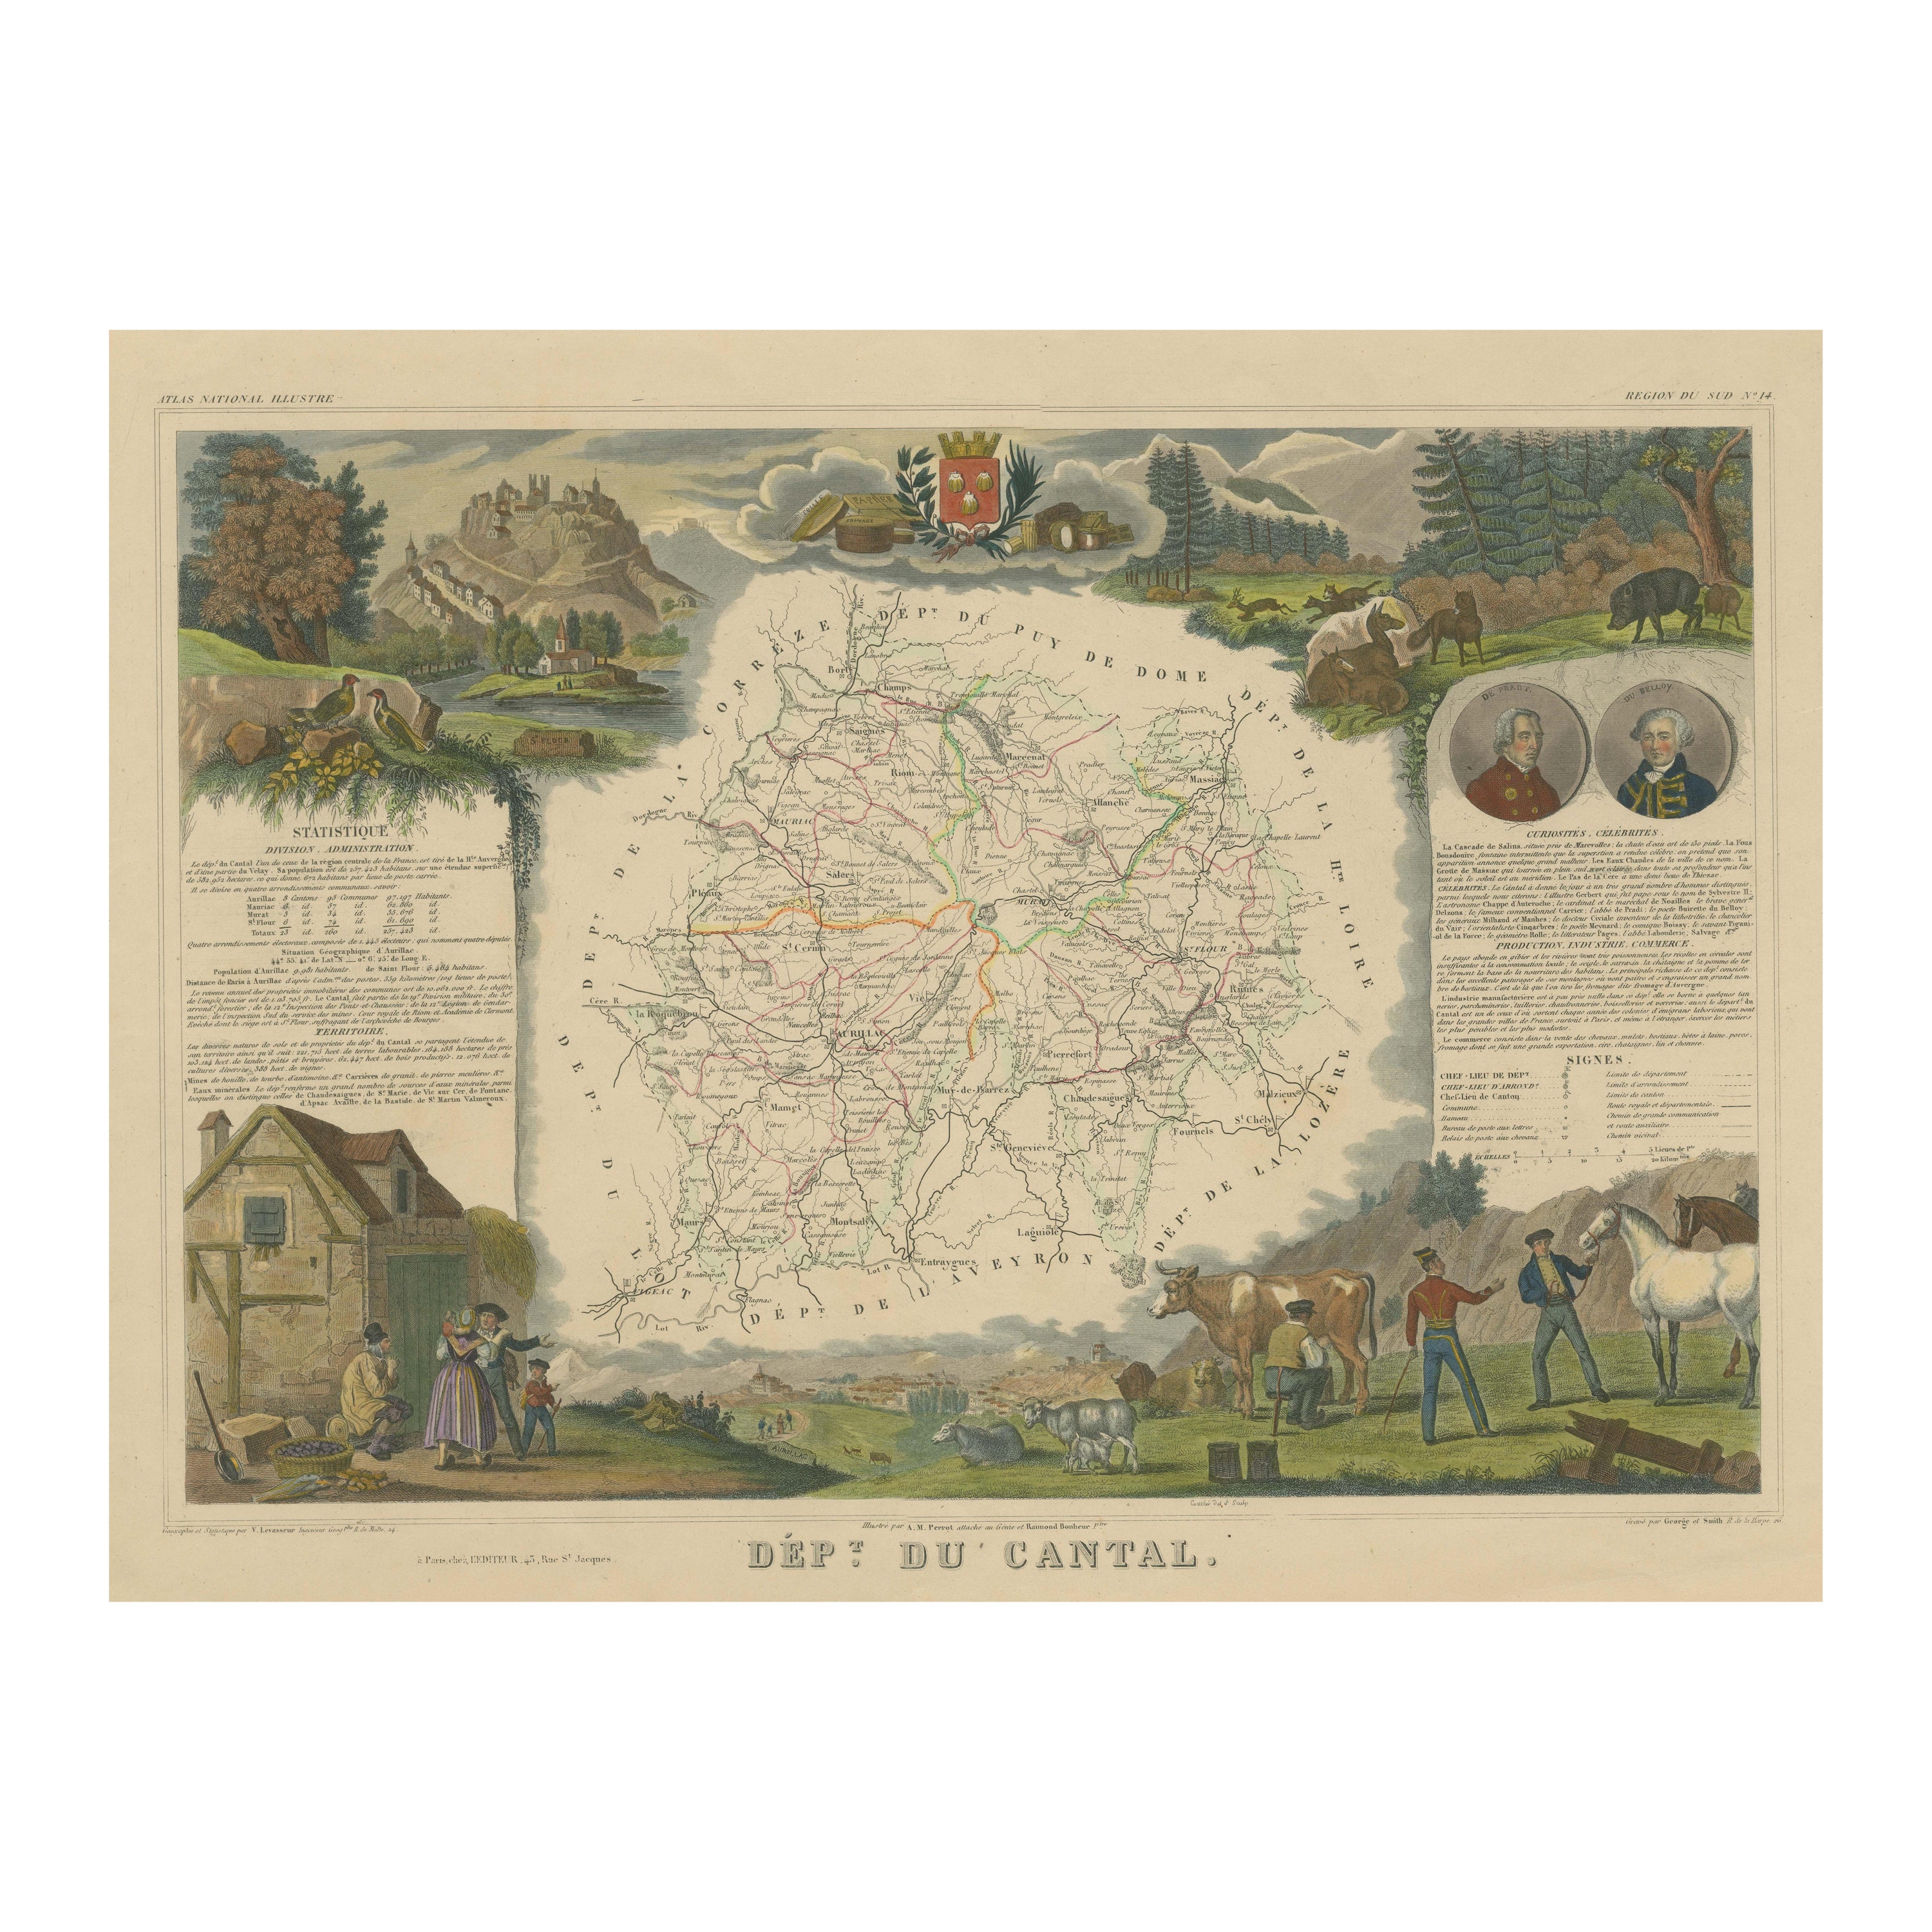 Old Map of the French Department of Cantal, France For Sale